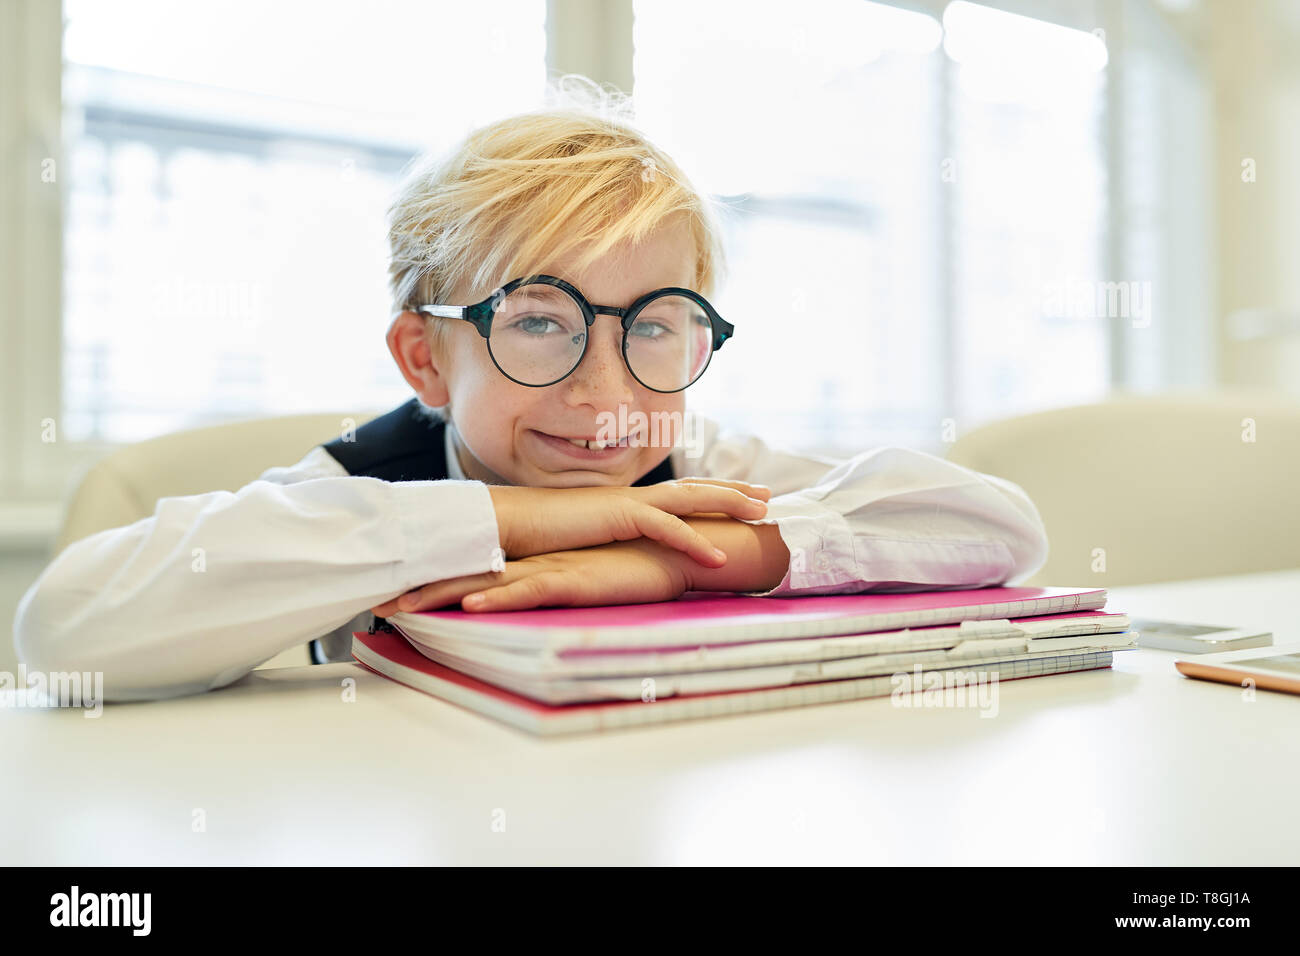 Smiling boy as a smart pupil with exercise books for the homework Stock Photo